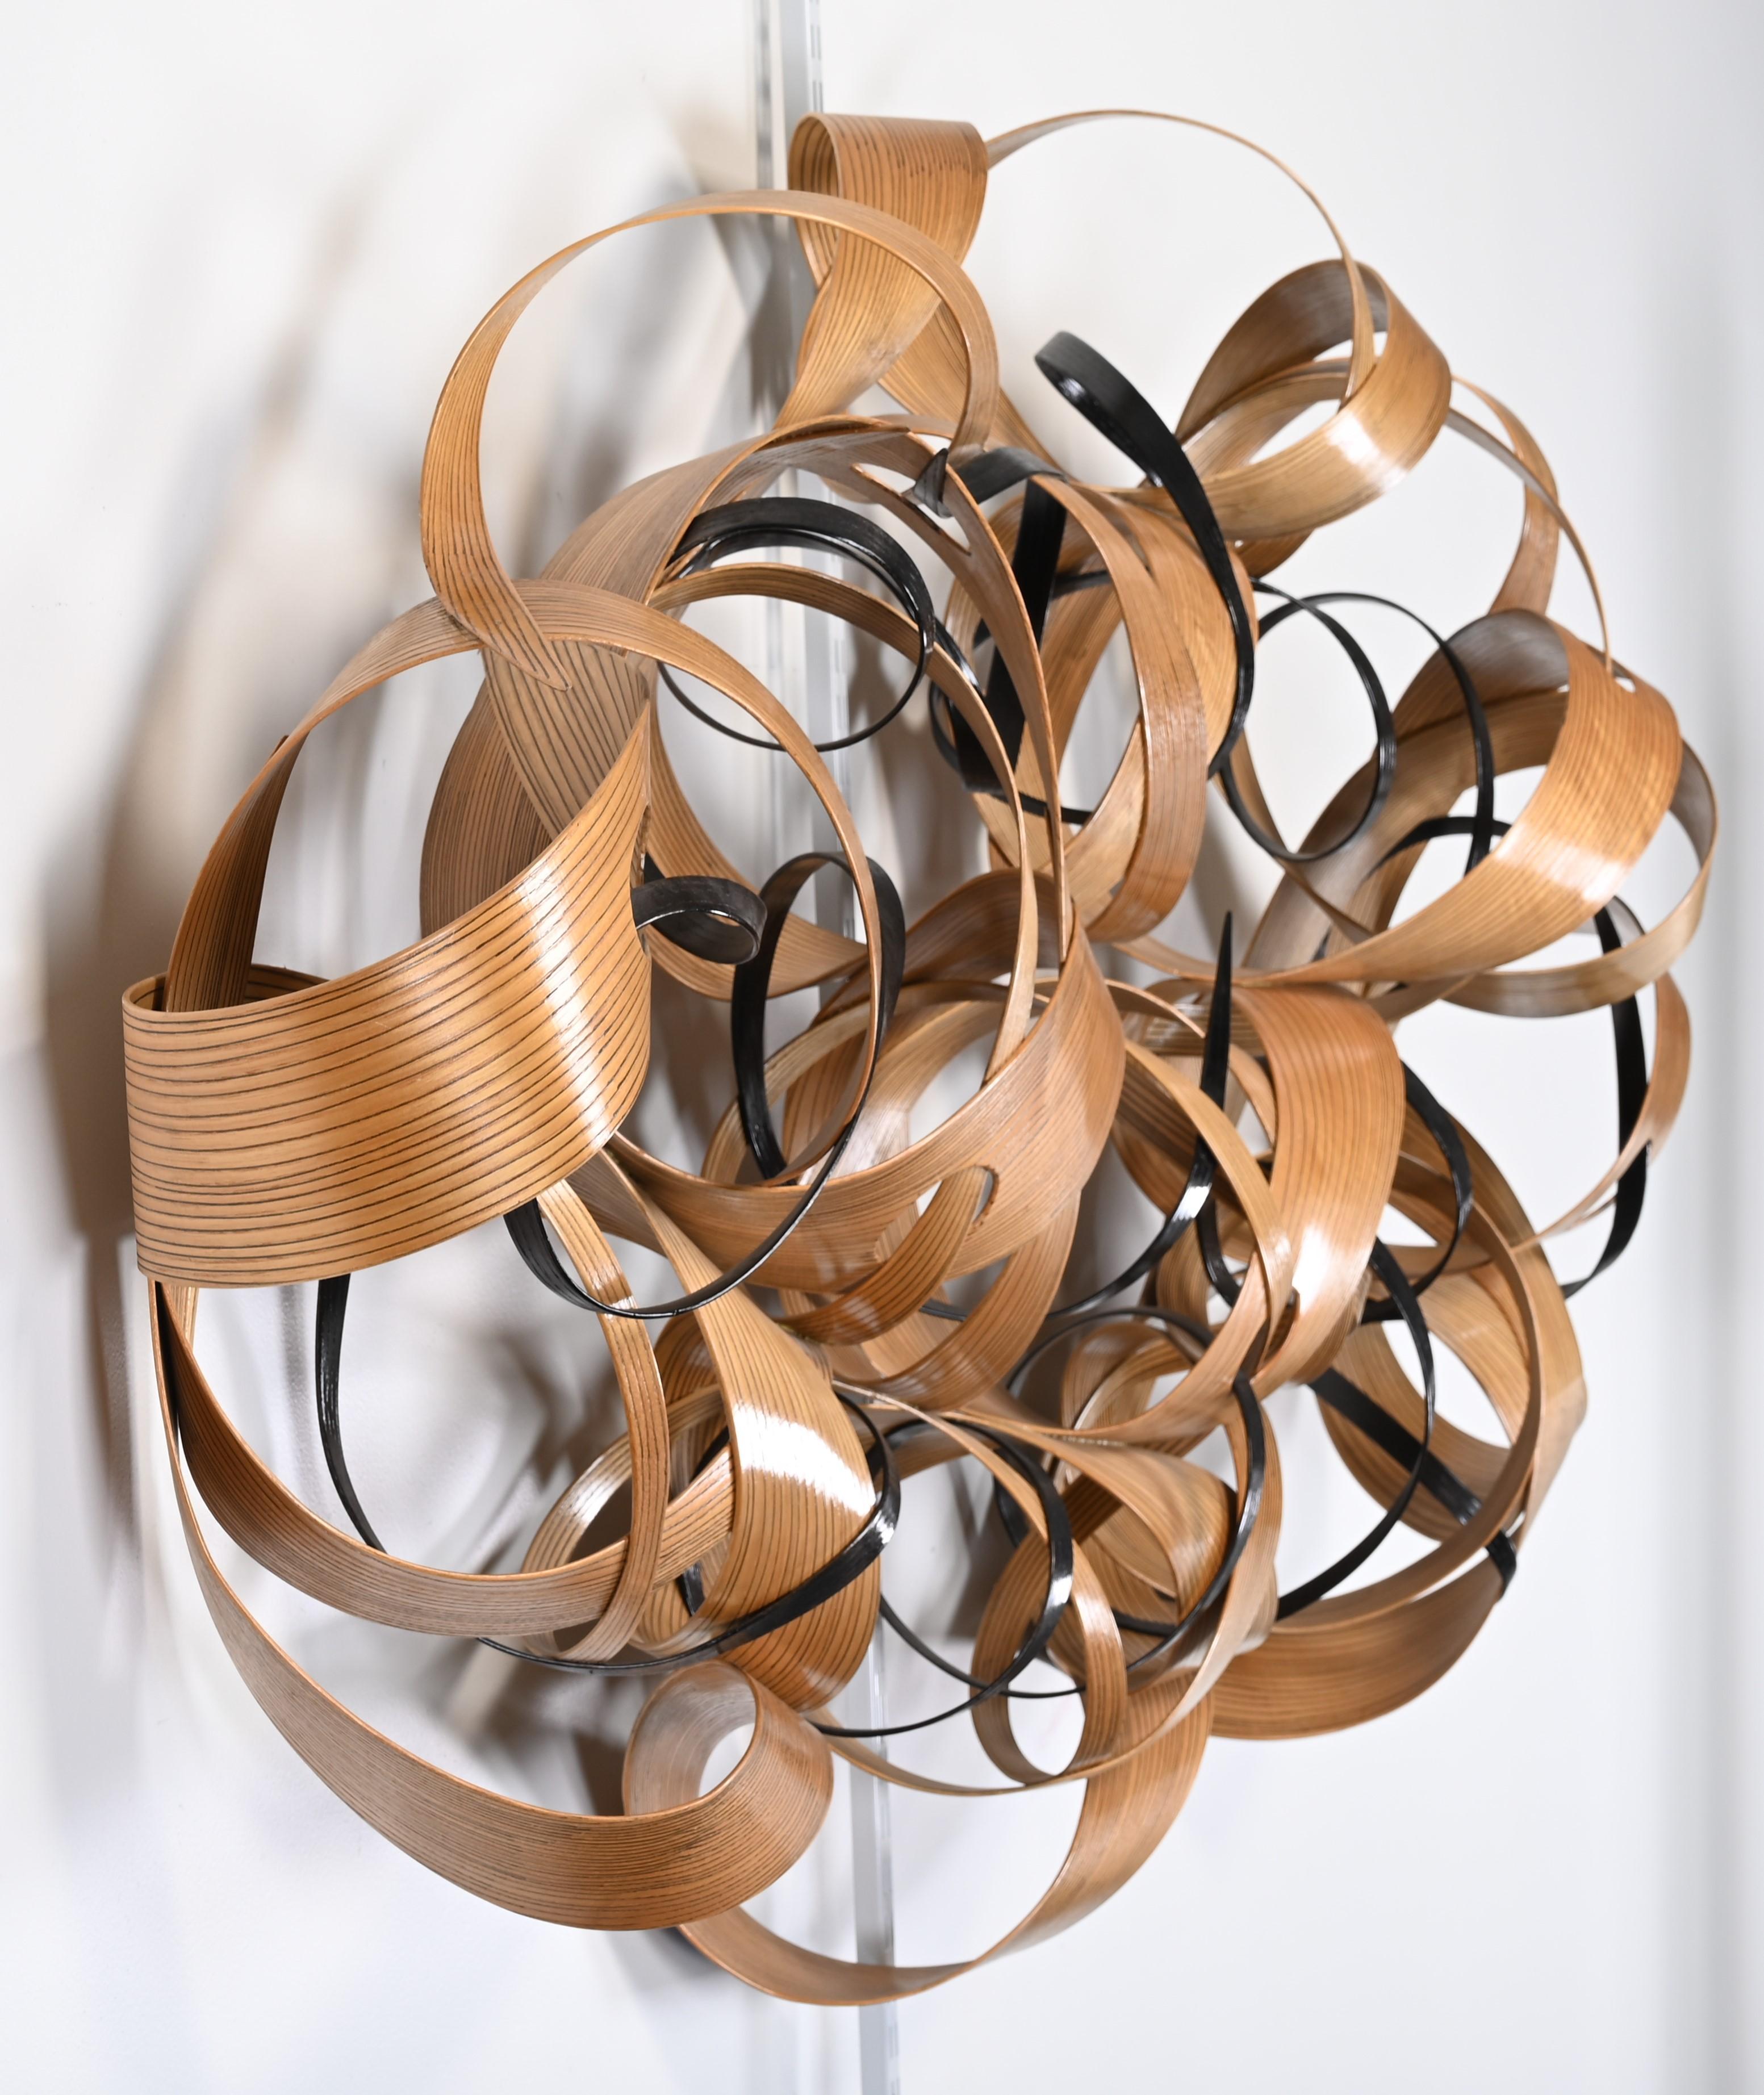 American Bentwood Wall Sculpture by Renee Dinauer, 2005